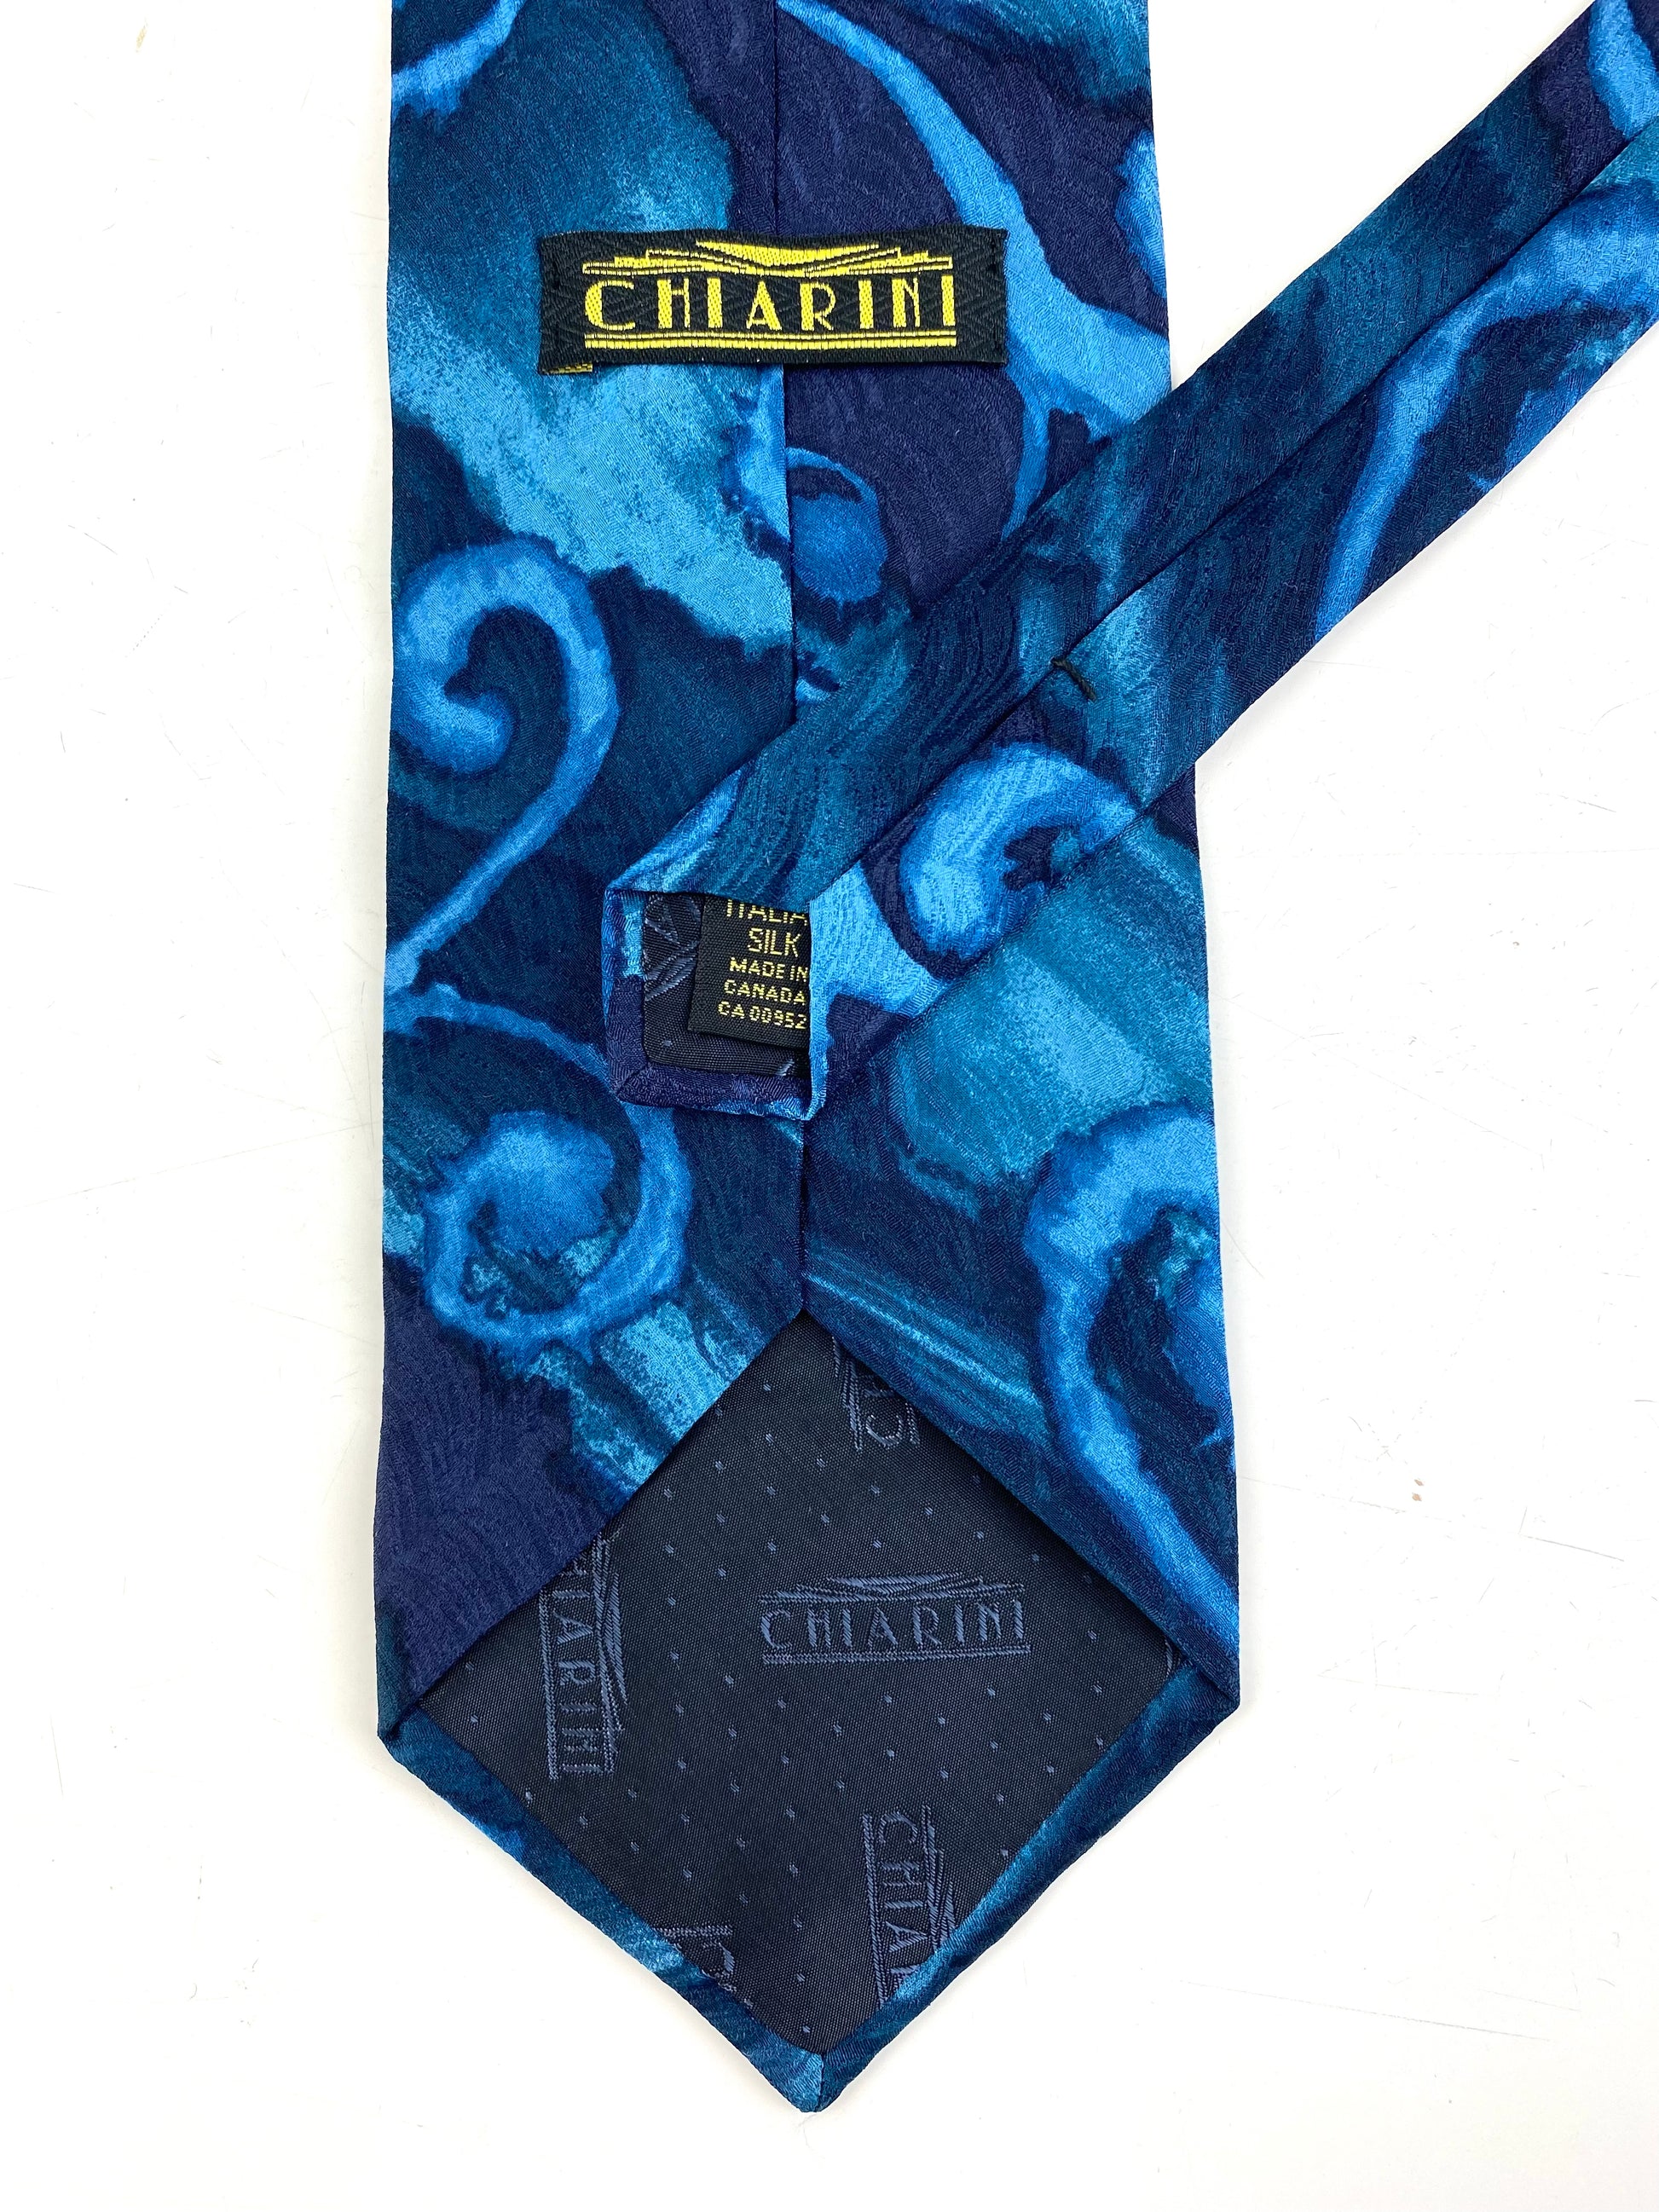 Back and labels of: 90s Deadstock Silk Necktie, Men's Vintage Teal/ Blue Abstract Pattern Tie, NOS